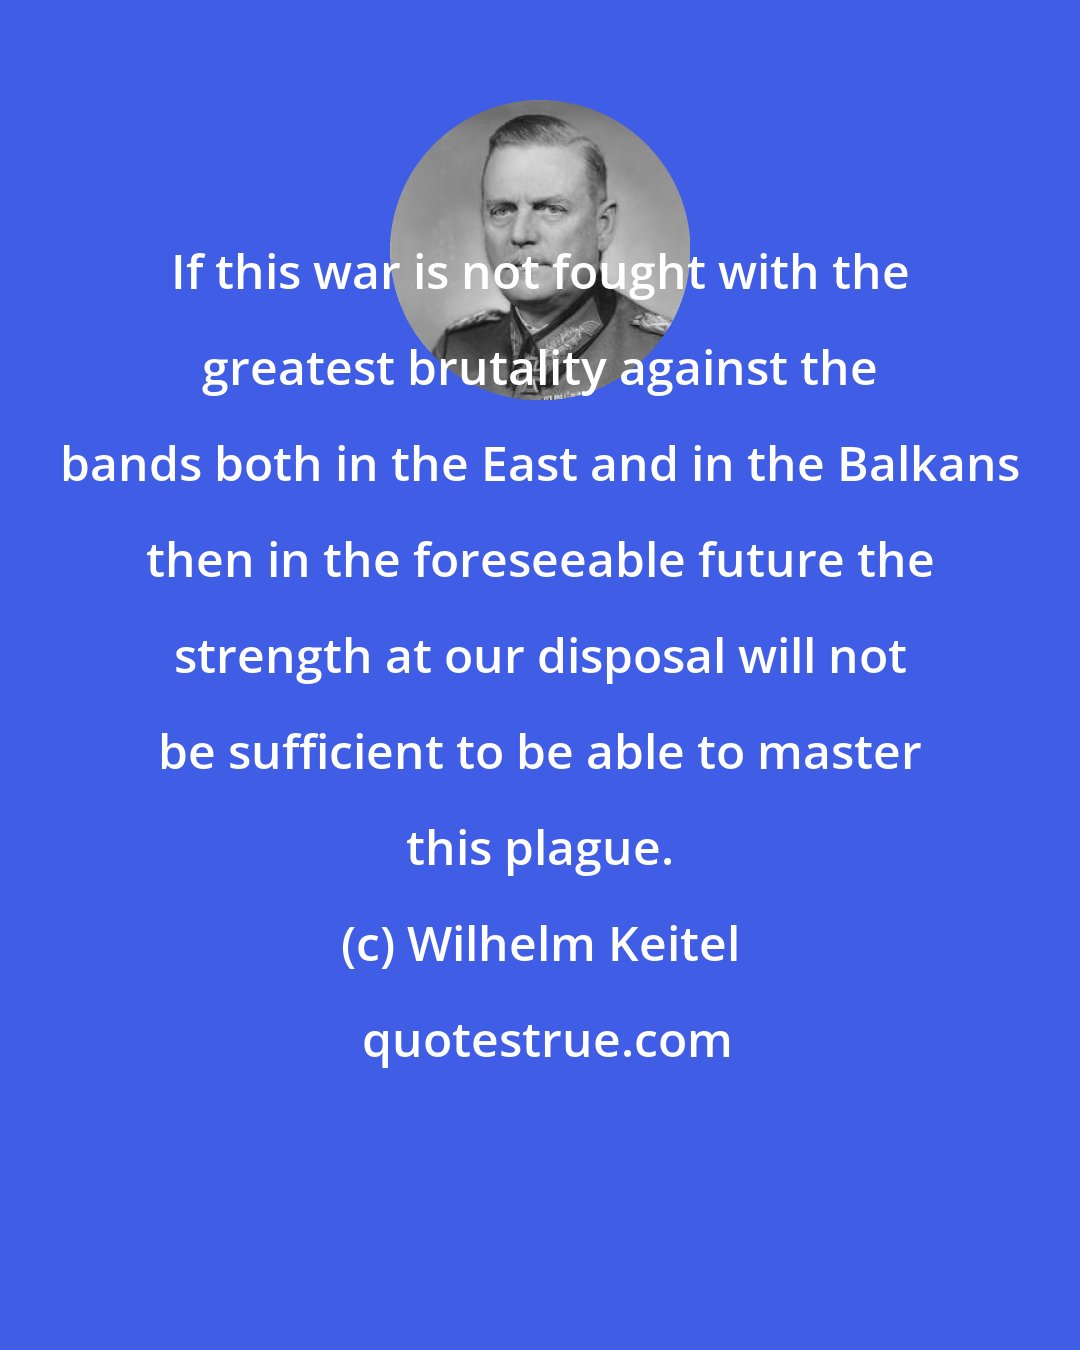 Wilhelm Keitel: If this war is not fought with the greatest brutality against the bands both in the East and in the Balkans then in the foreseeable future the strength at our disposal will not be sufficient to be able to master this plague.